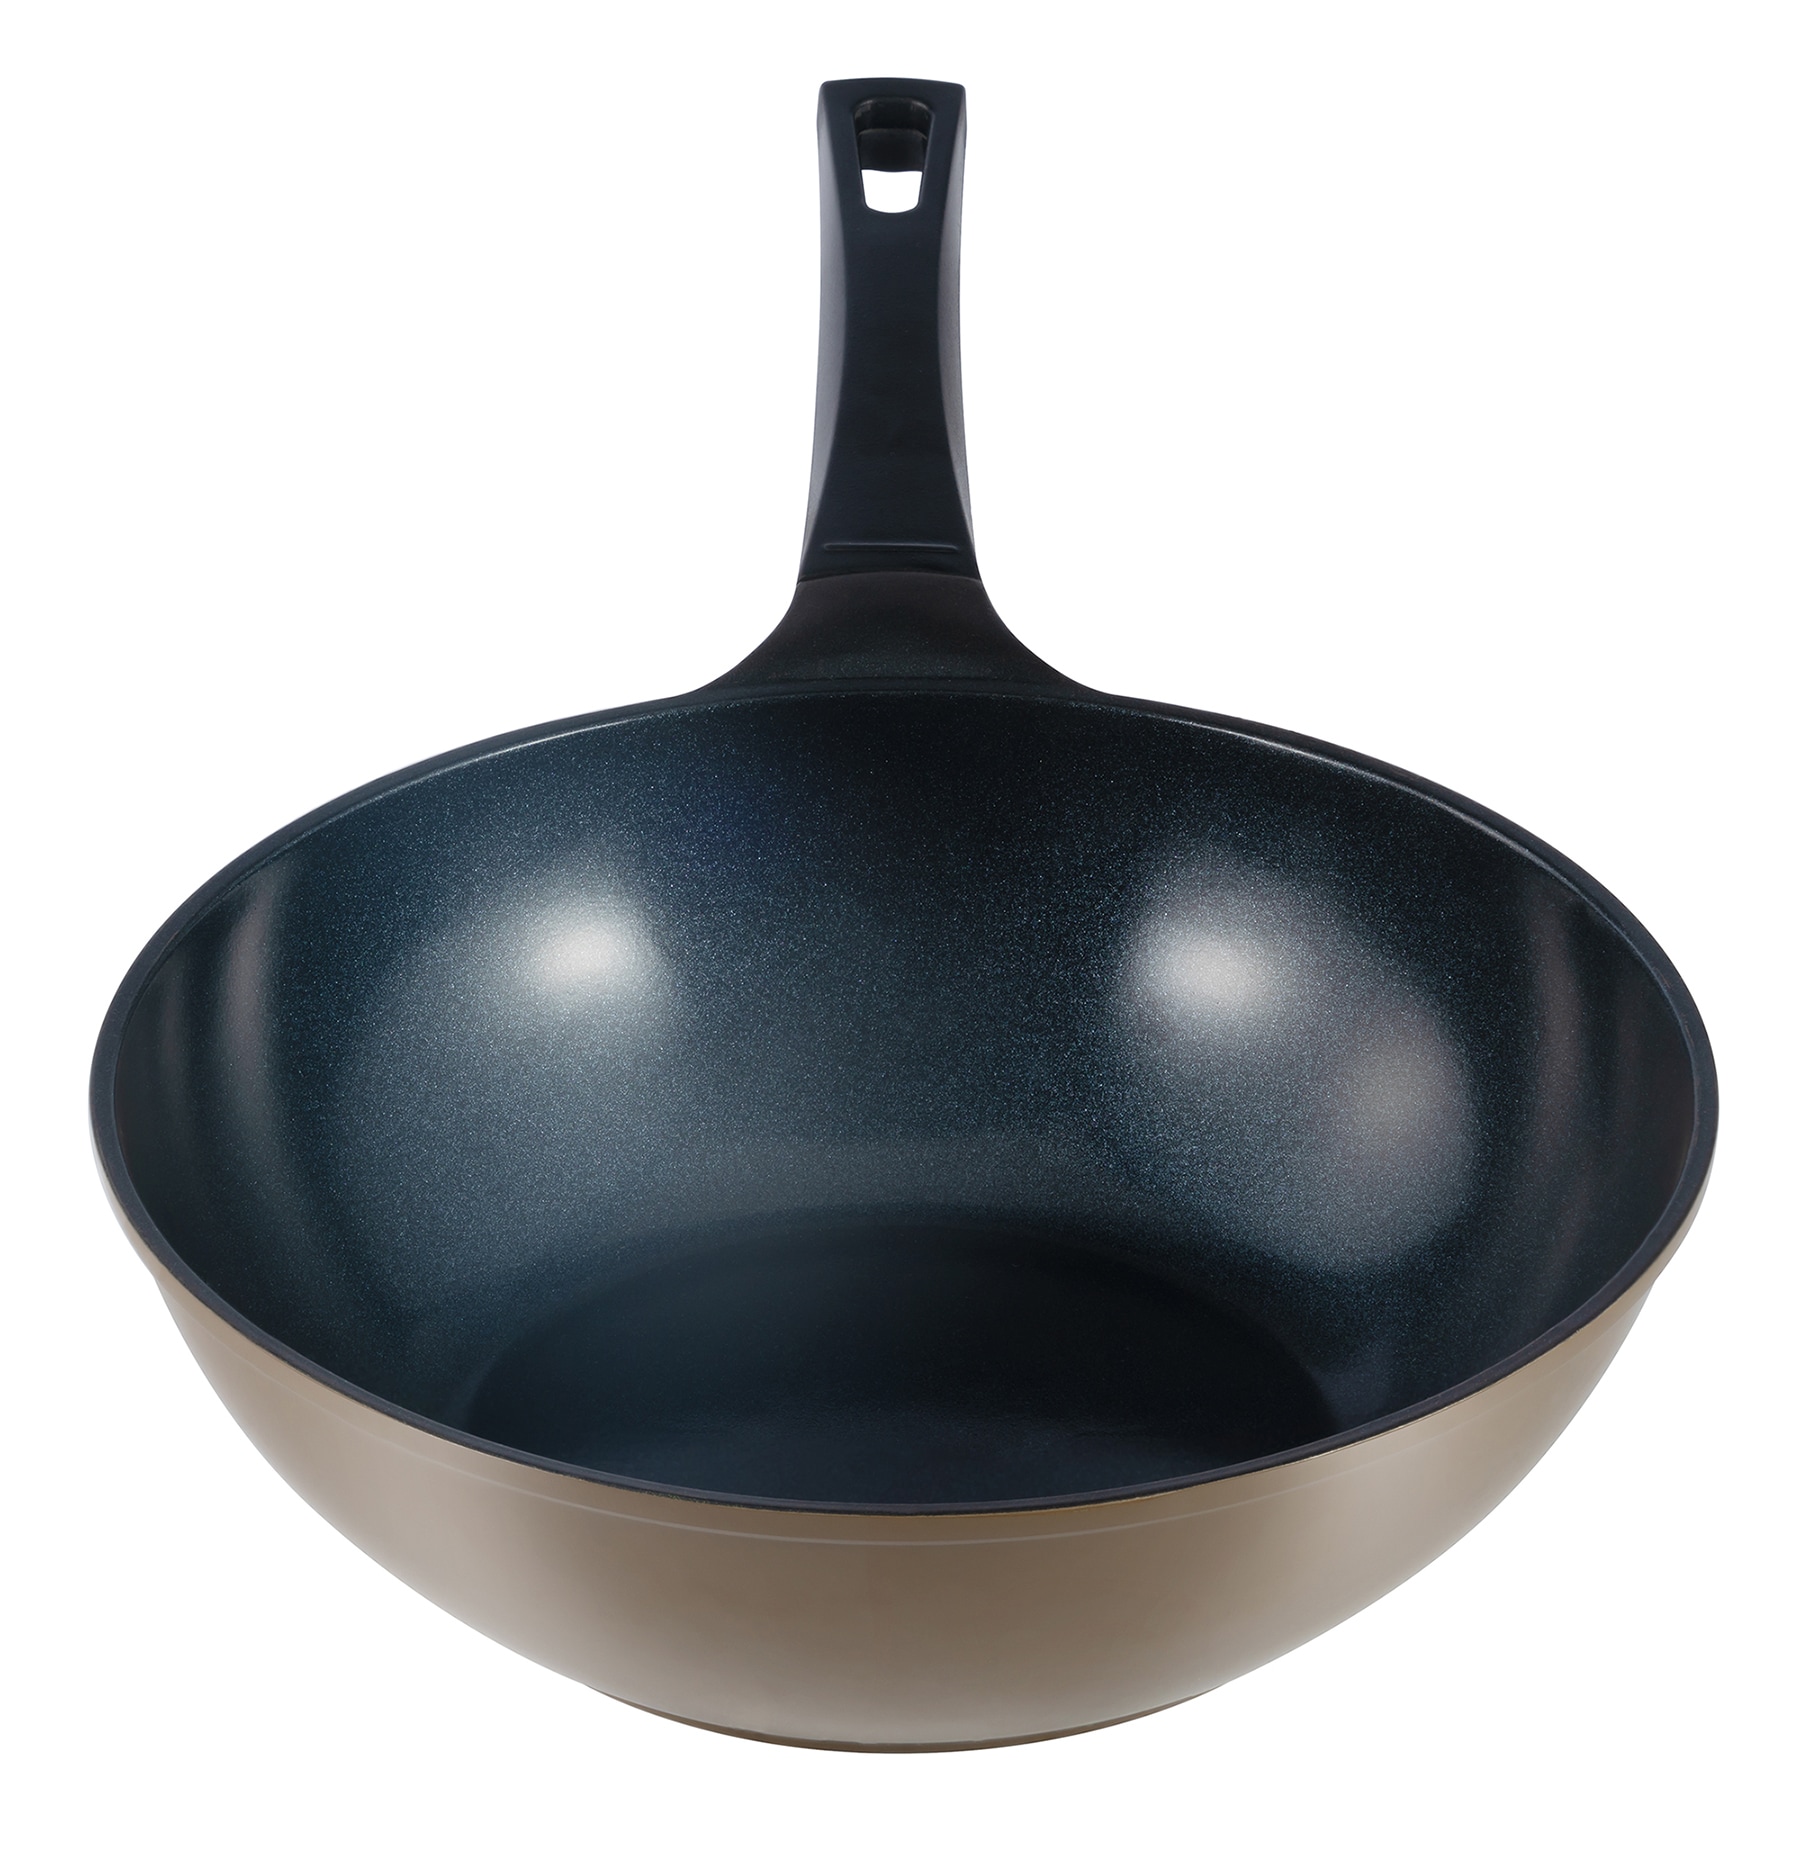 12 Green Earth Wok by Ozeri, with Smooth Ceramic Non-Stick Coating